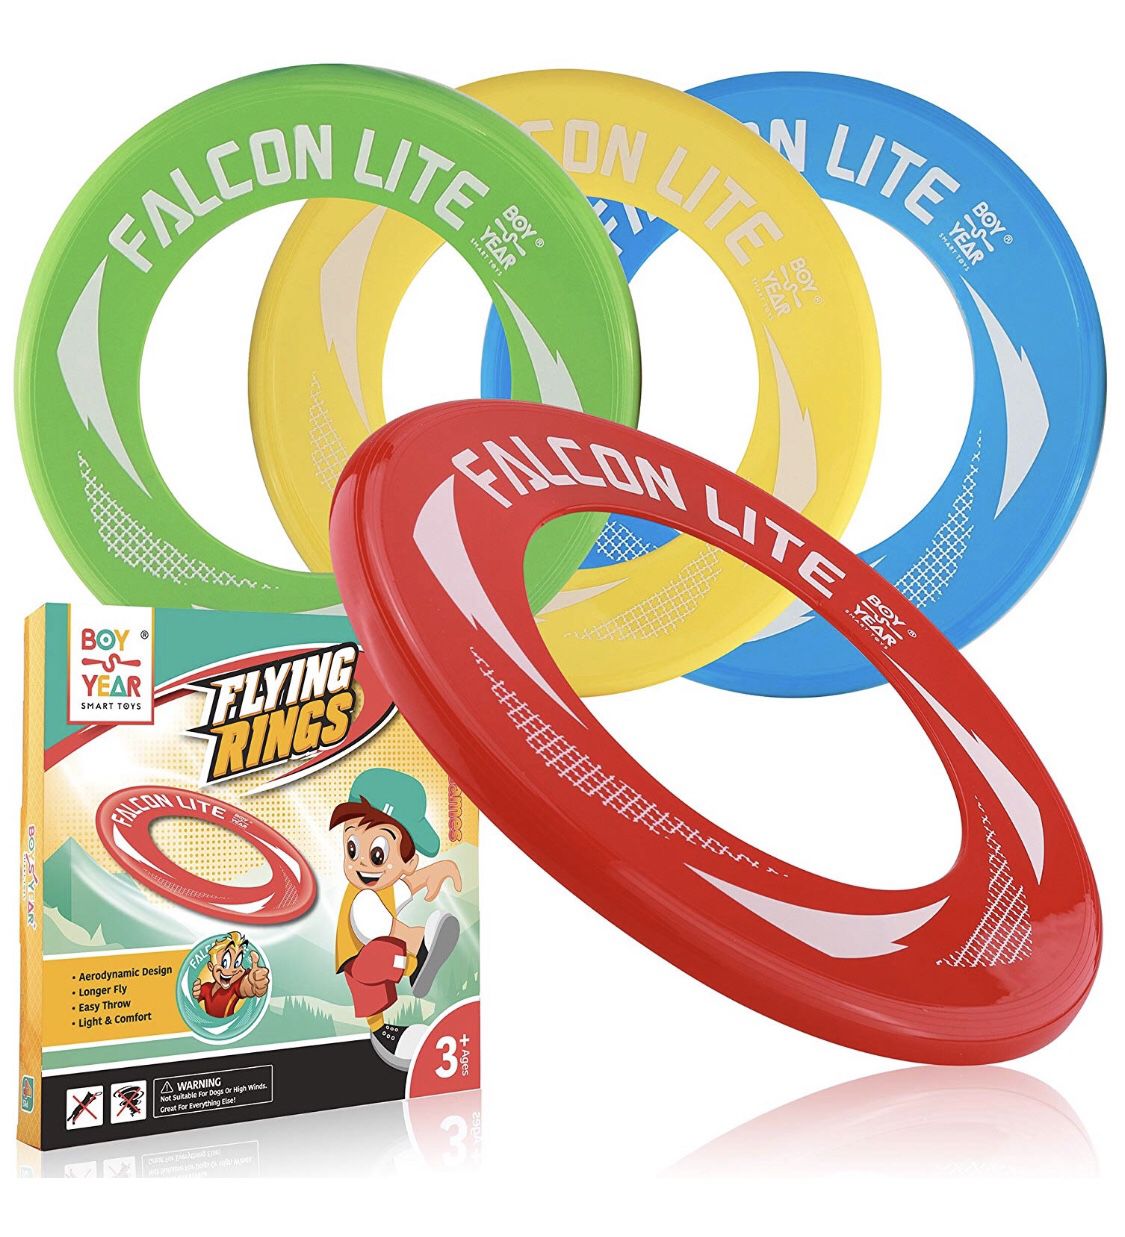 4-Pack Falcon Lite Flying Disc Rings - 2018 Hot Outdoors Game, Beach Games, Water - Summer Toys For Kids - Outdoor Gifts & Best Gift For Teen Boys, G